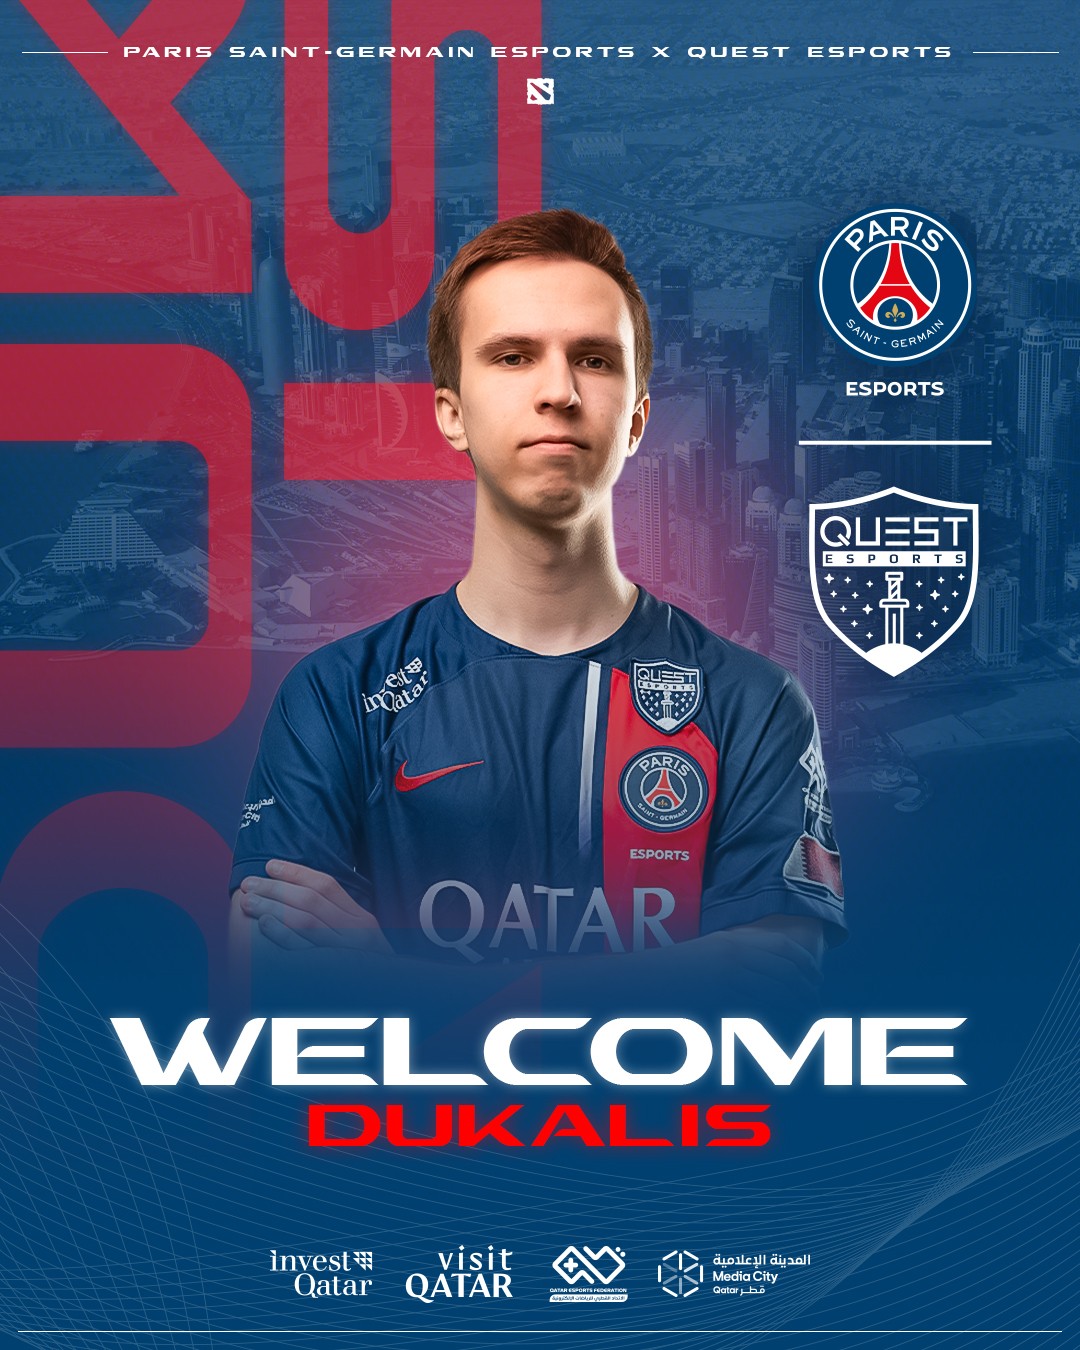 dukalis in psg quest